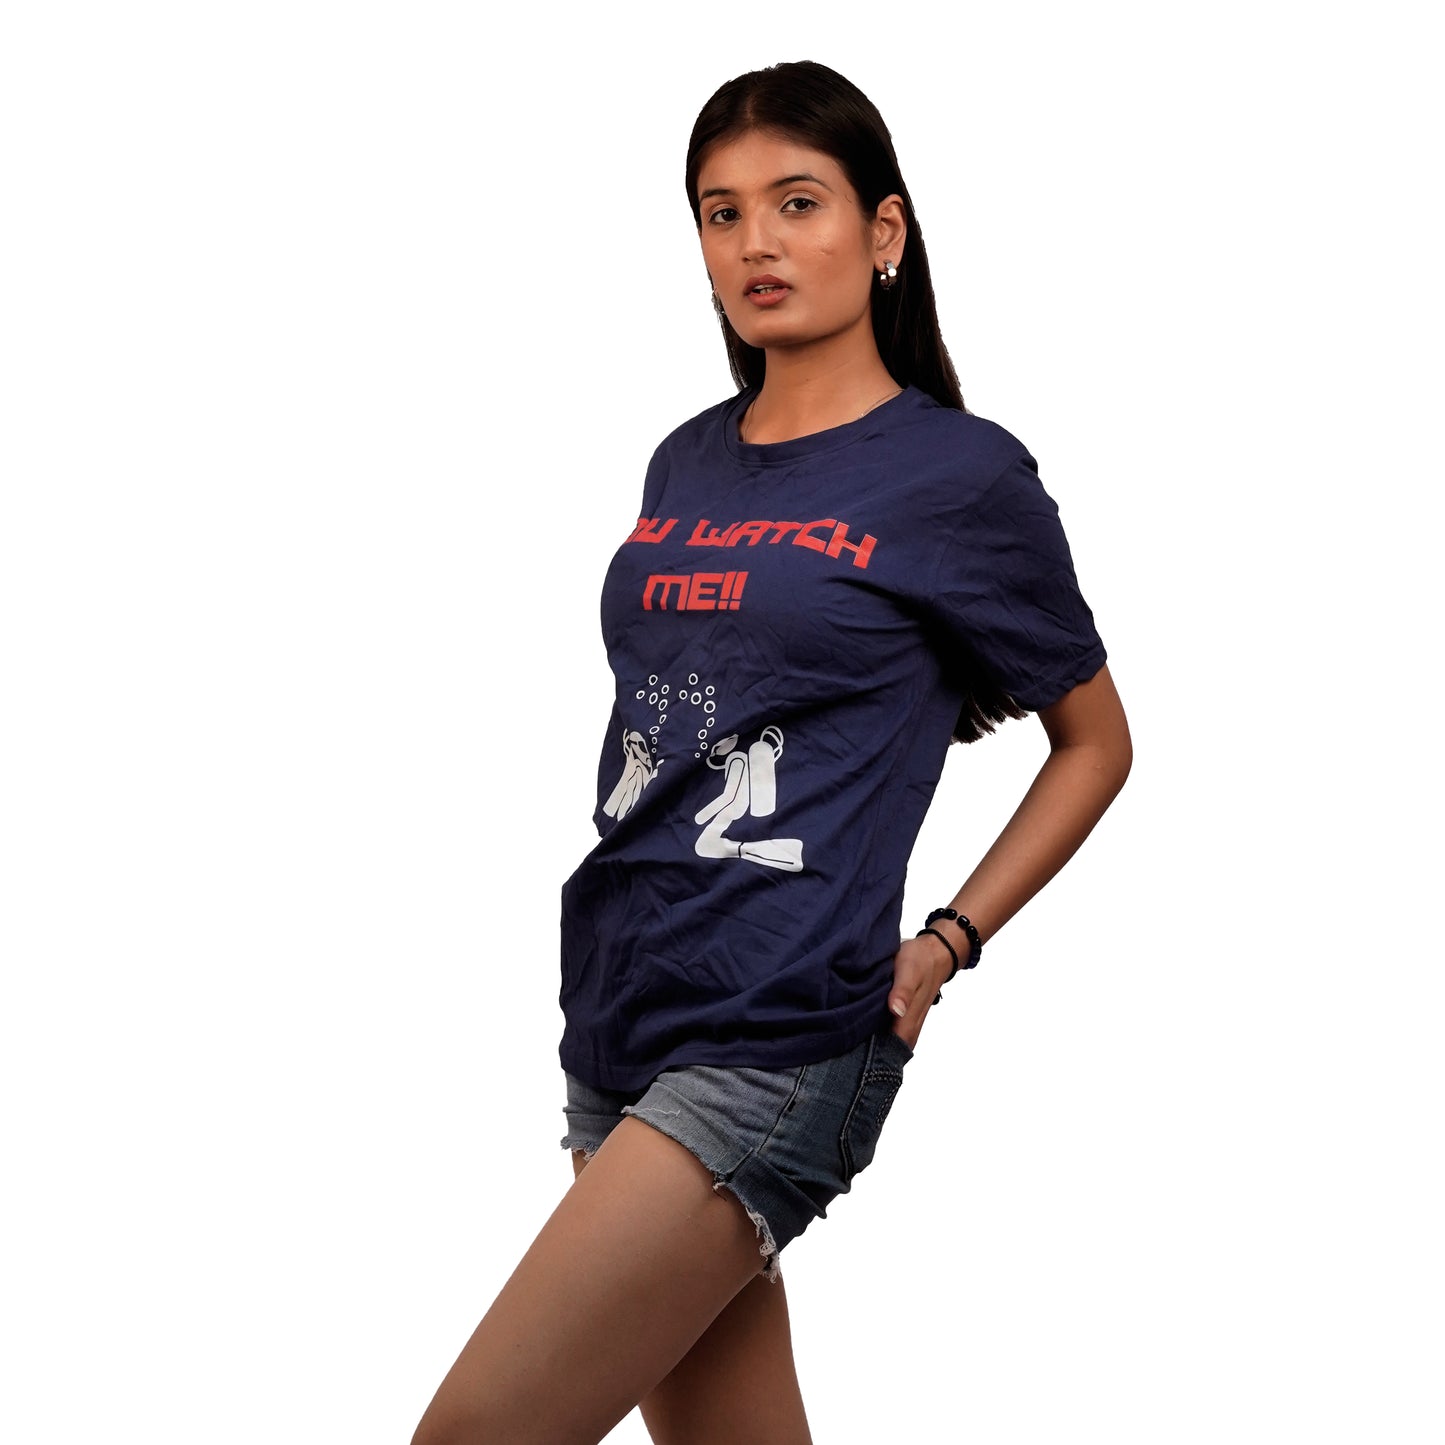 You Watch Me T-shirt In Navy Blue Color For Women